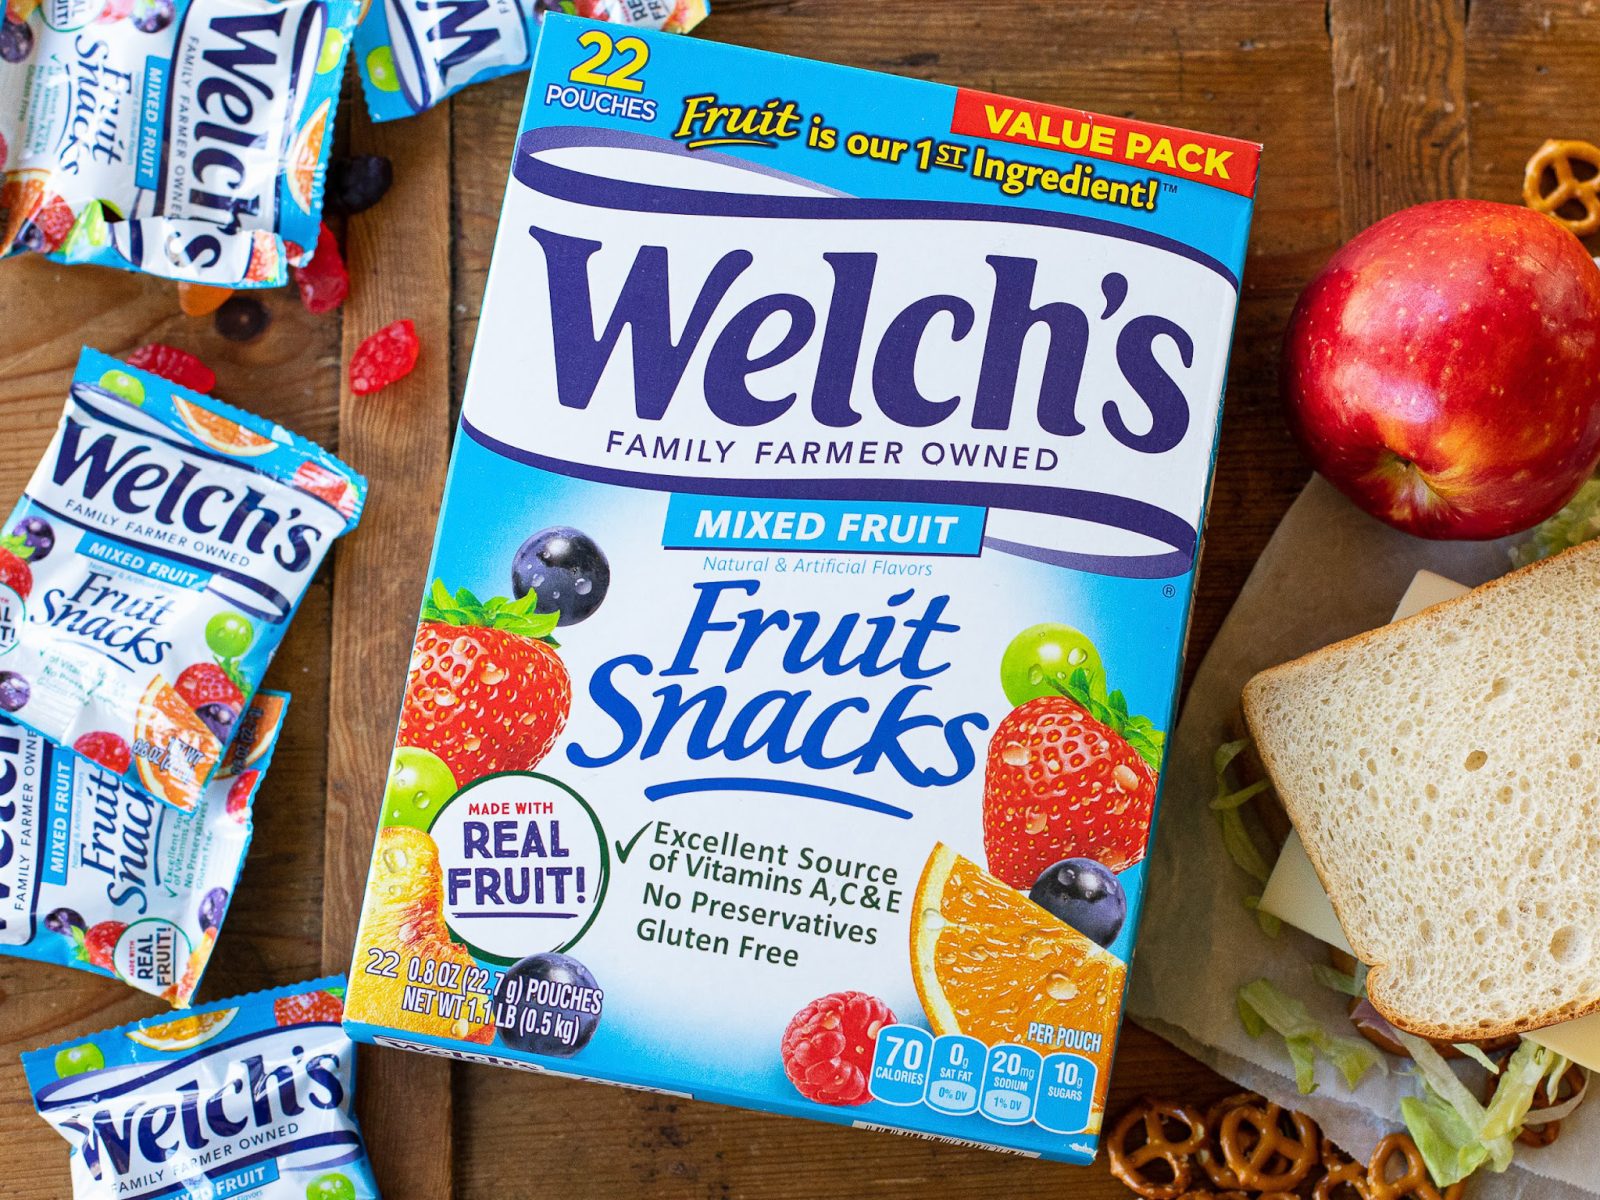 Get The Boxes Of Welch’s Fruit Snacks As Low As $2 Per Box At Kroger